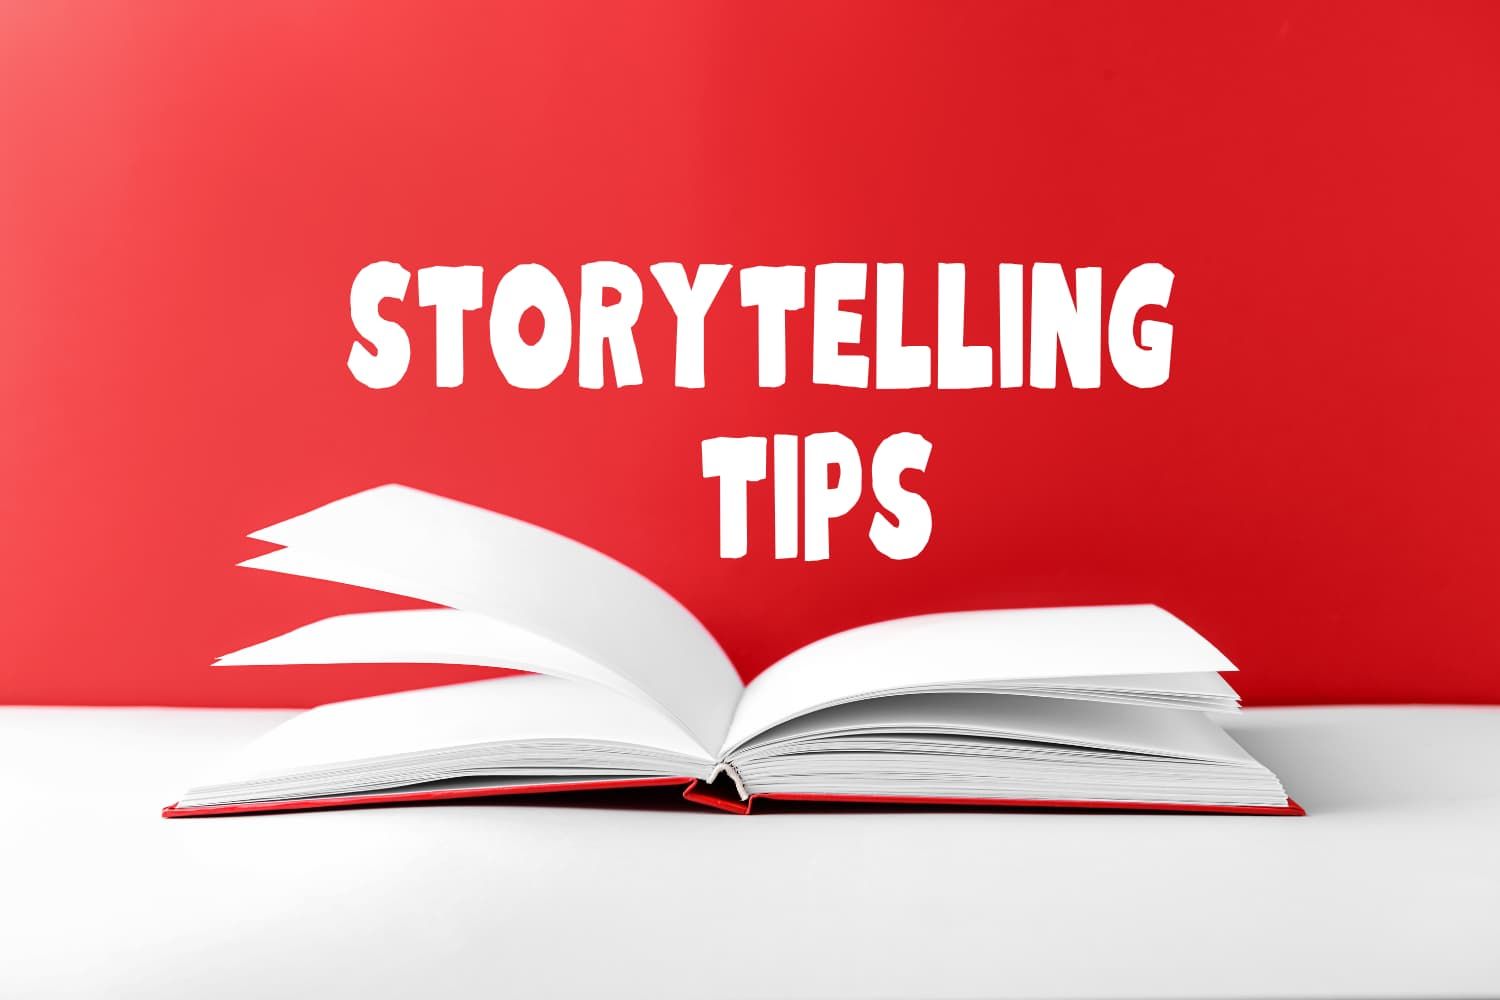 Storytelling%20tips%20-%20NT%20The%20pharisee%20and%20the%20tax%20collector%20-%20Teaching%20the%20parable%20of%20the%20tax%20collector%20and%20pharisee-bb2ec4e5 Jesus - His parables